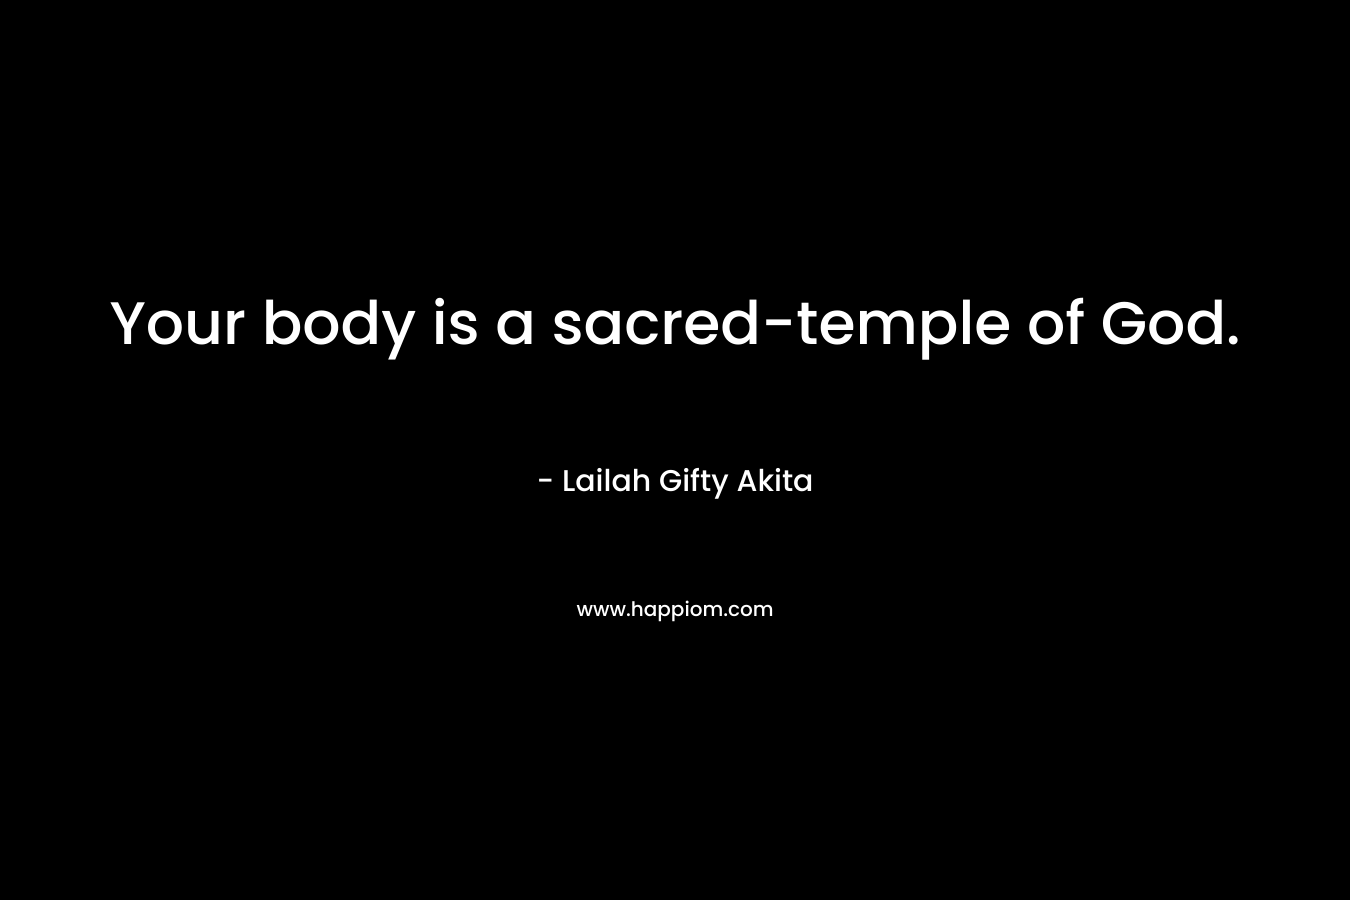 Your body is a sacred-temple of God. – Lailah Gifty Akita